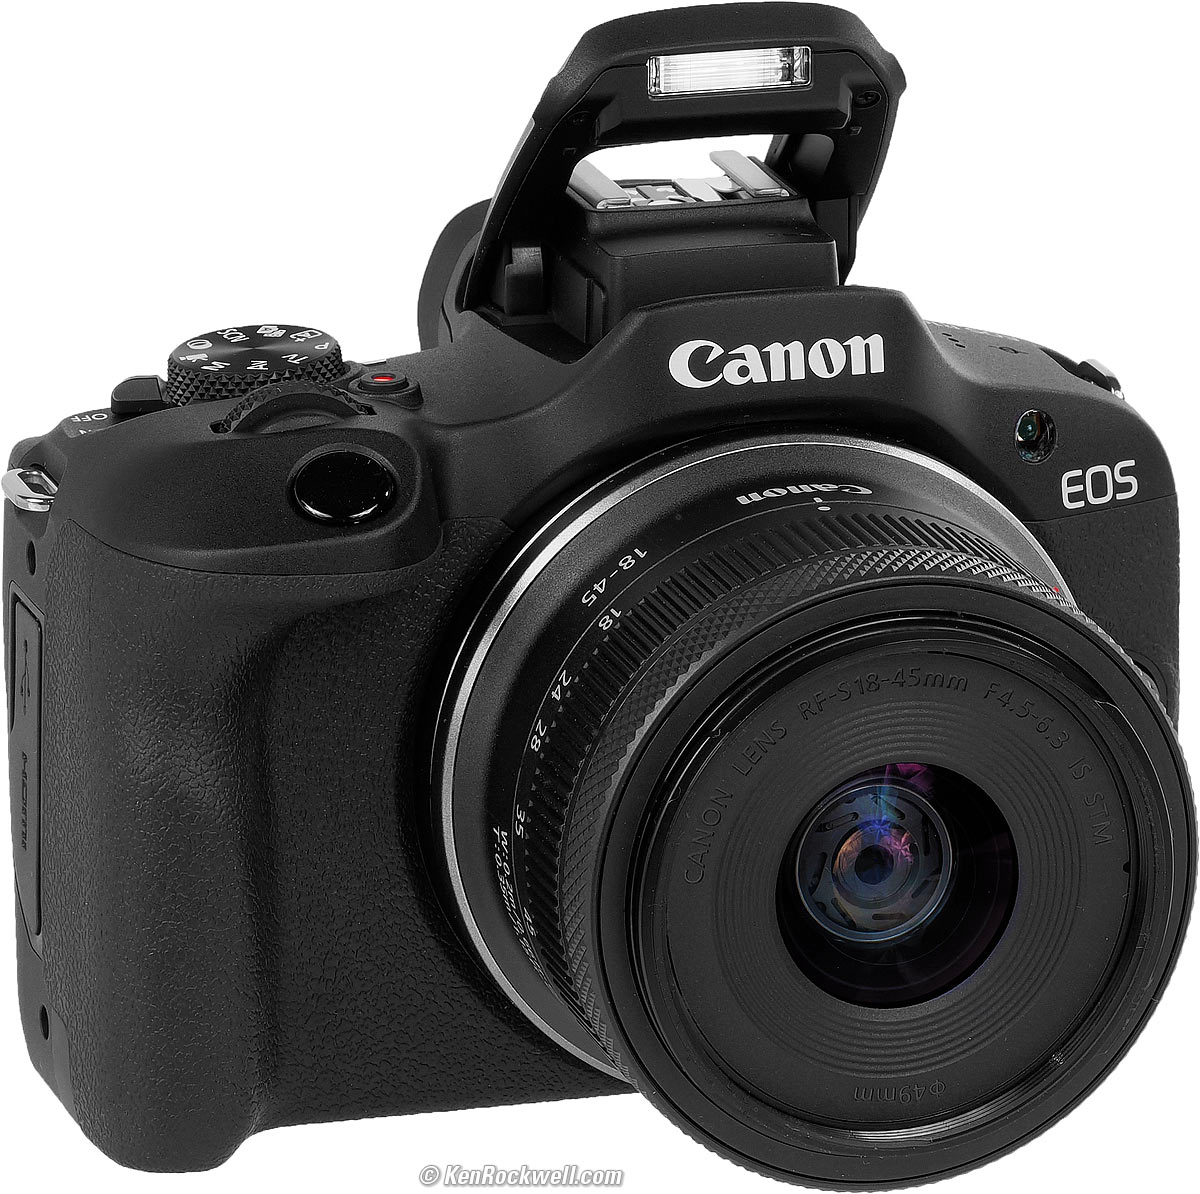 Canon R100 mirrorless camera drops to its lowest price ever!